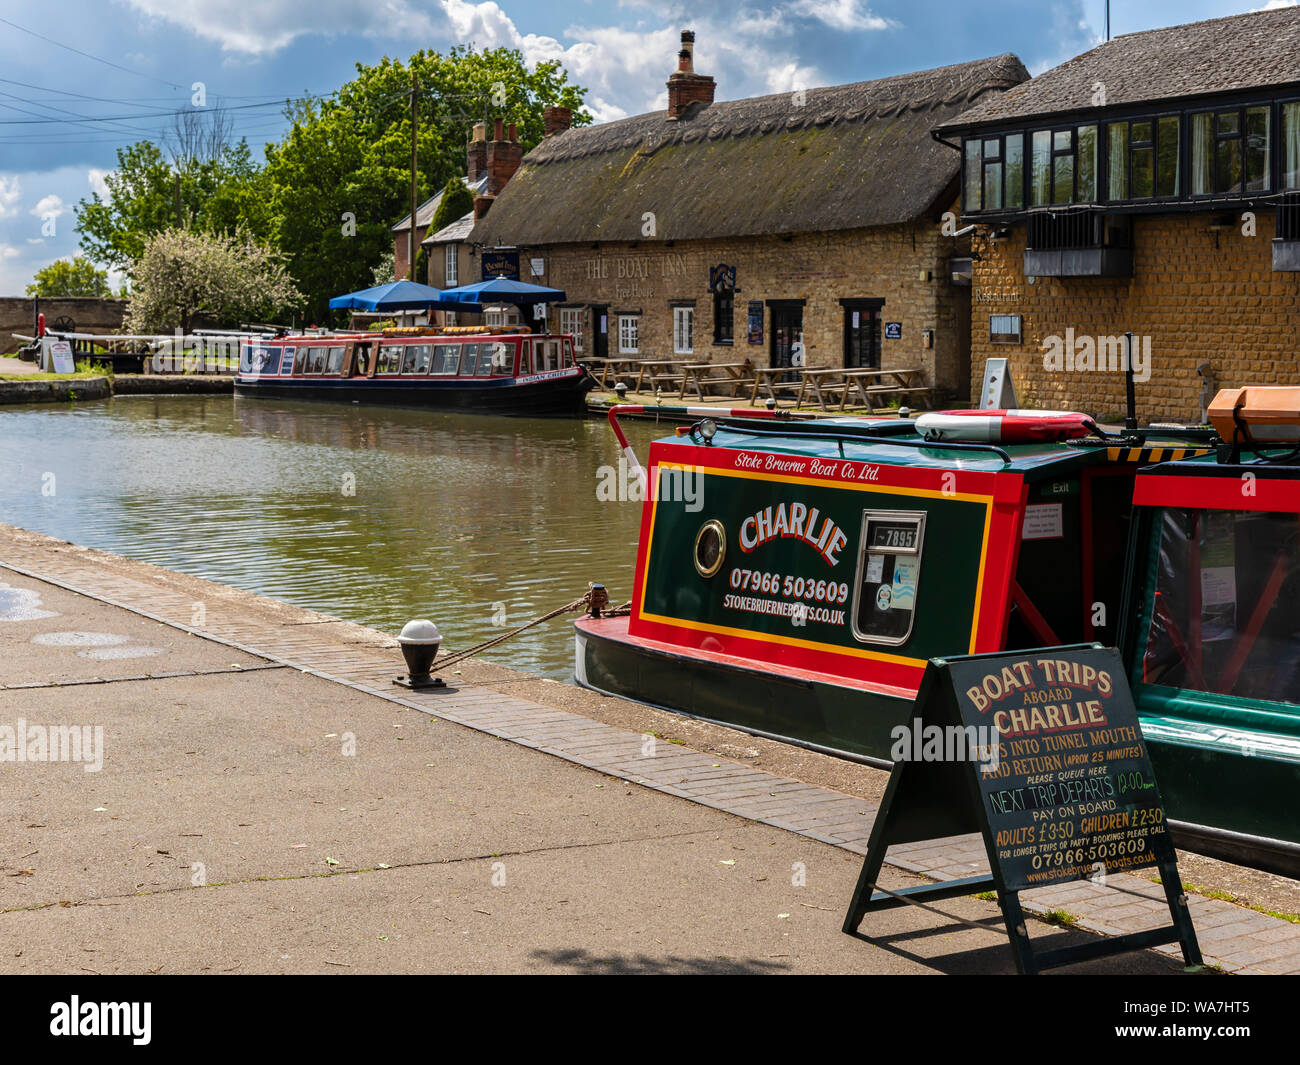 STOKE BRUERNE, NORTHAMPTONSHIRE, UK - MAY 10, 2019:  Narrowboats moored on the Grand Union Canal offering Day Trips Stock Photo